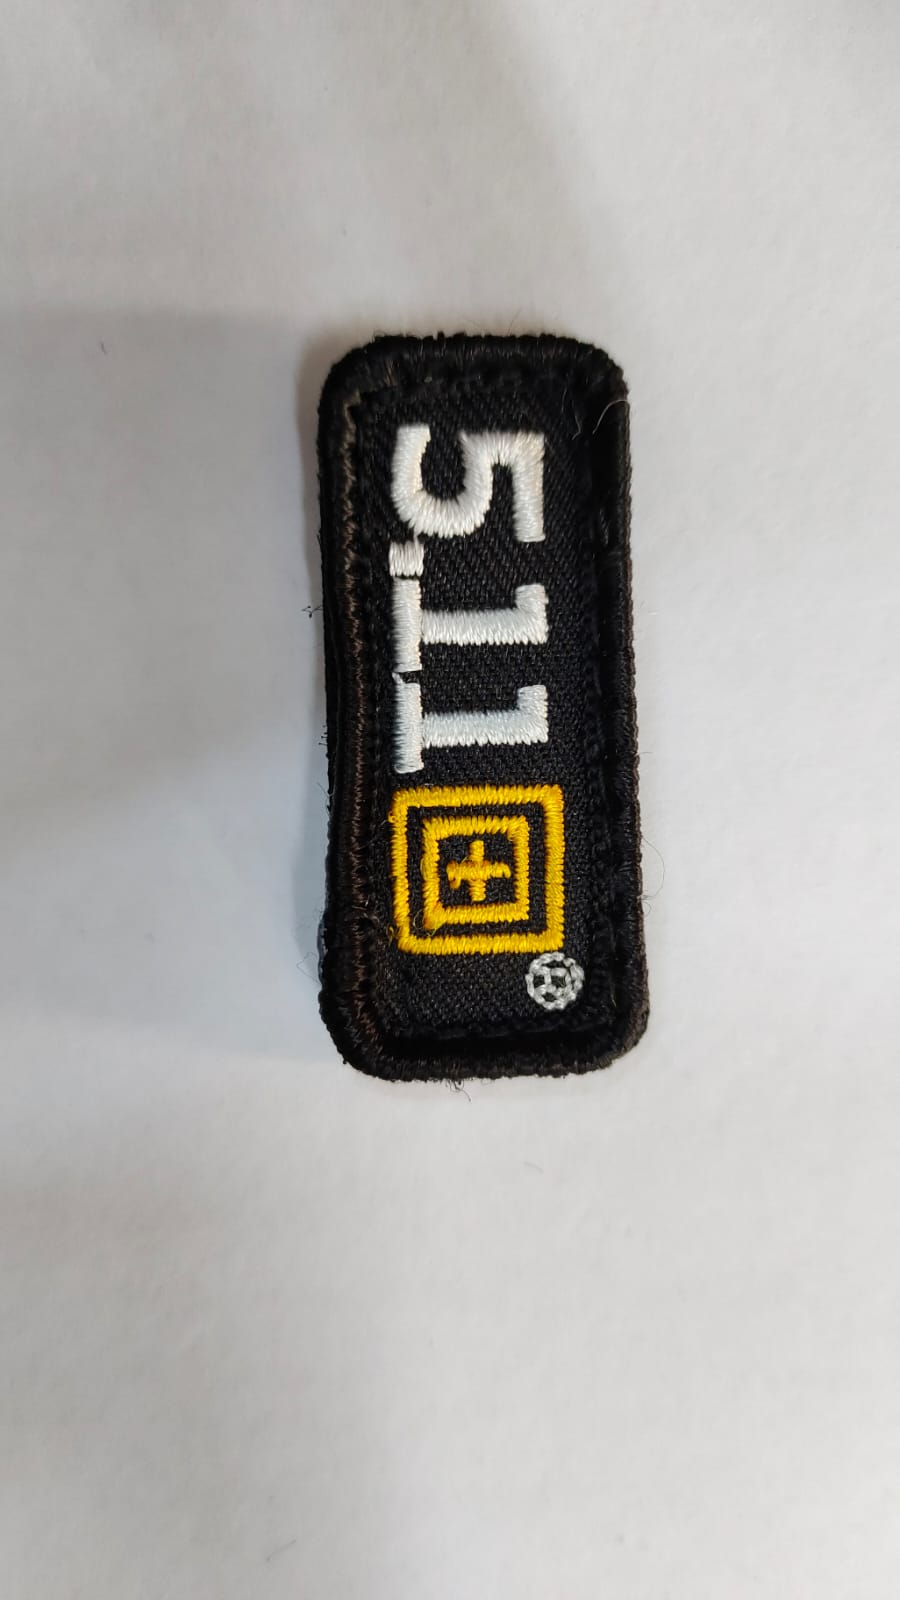 Missions - 5.11 Embroidery 2x5cm Patch